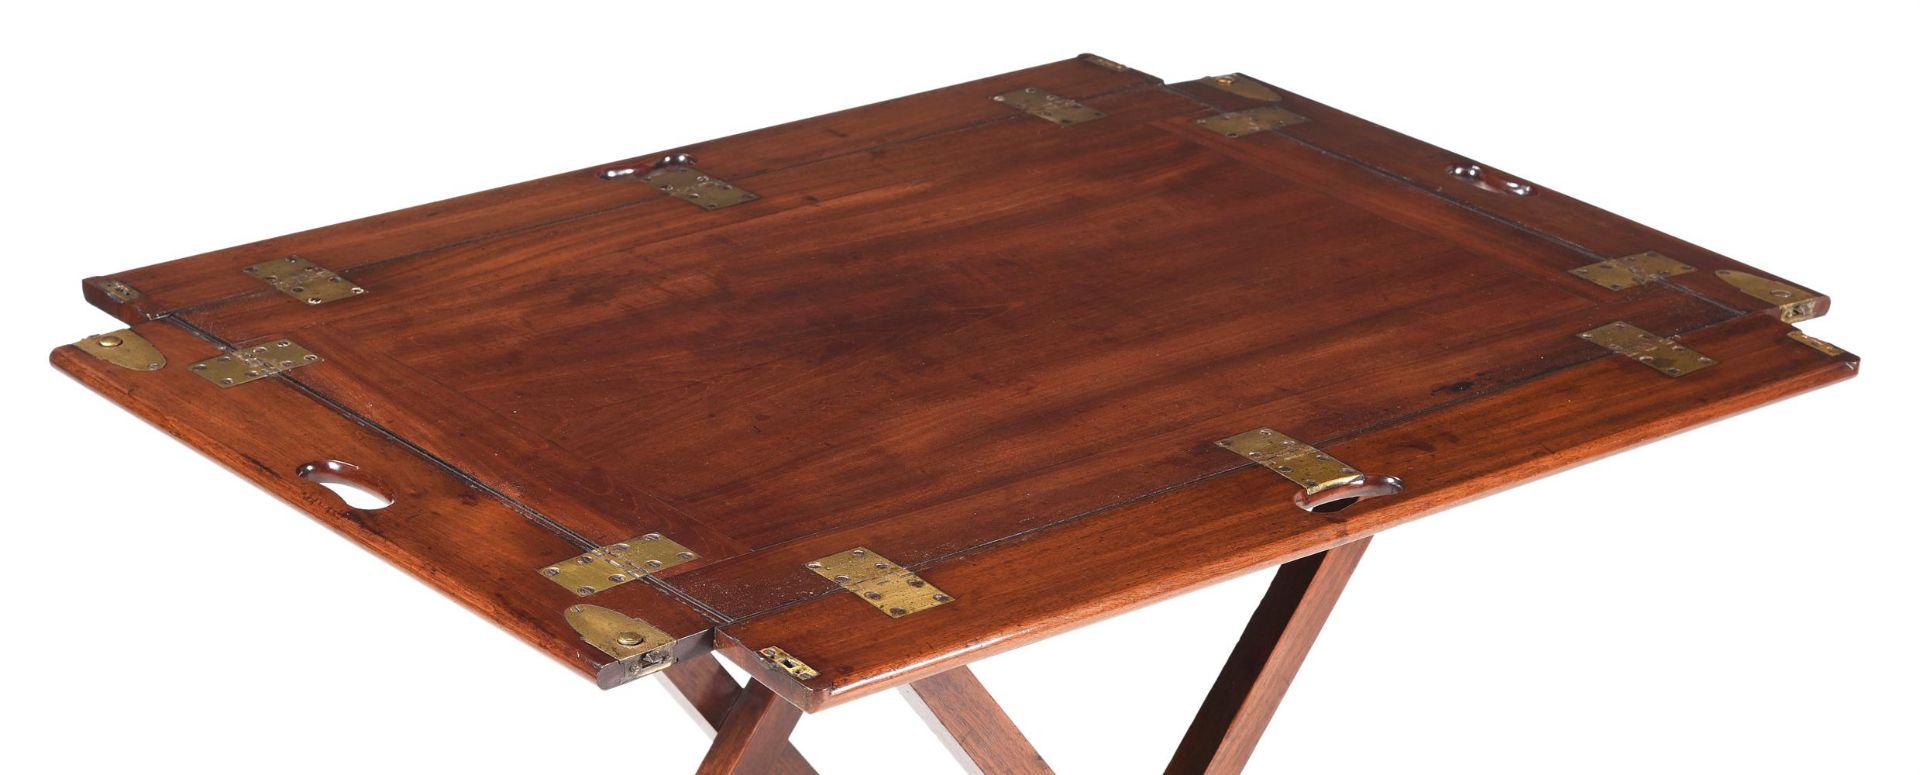 A GEORGE III MAHOGANY BUTLER'S TRAY ON STAND, LATE 18TH CENTURY - Image 3 of 3